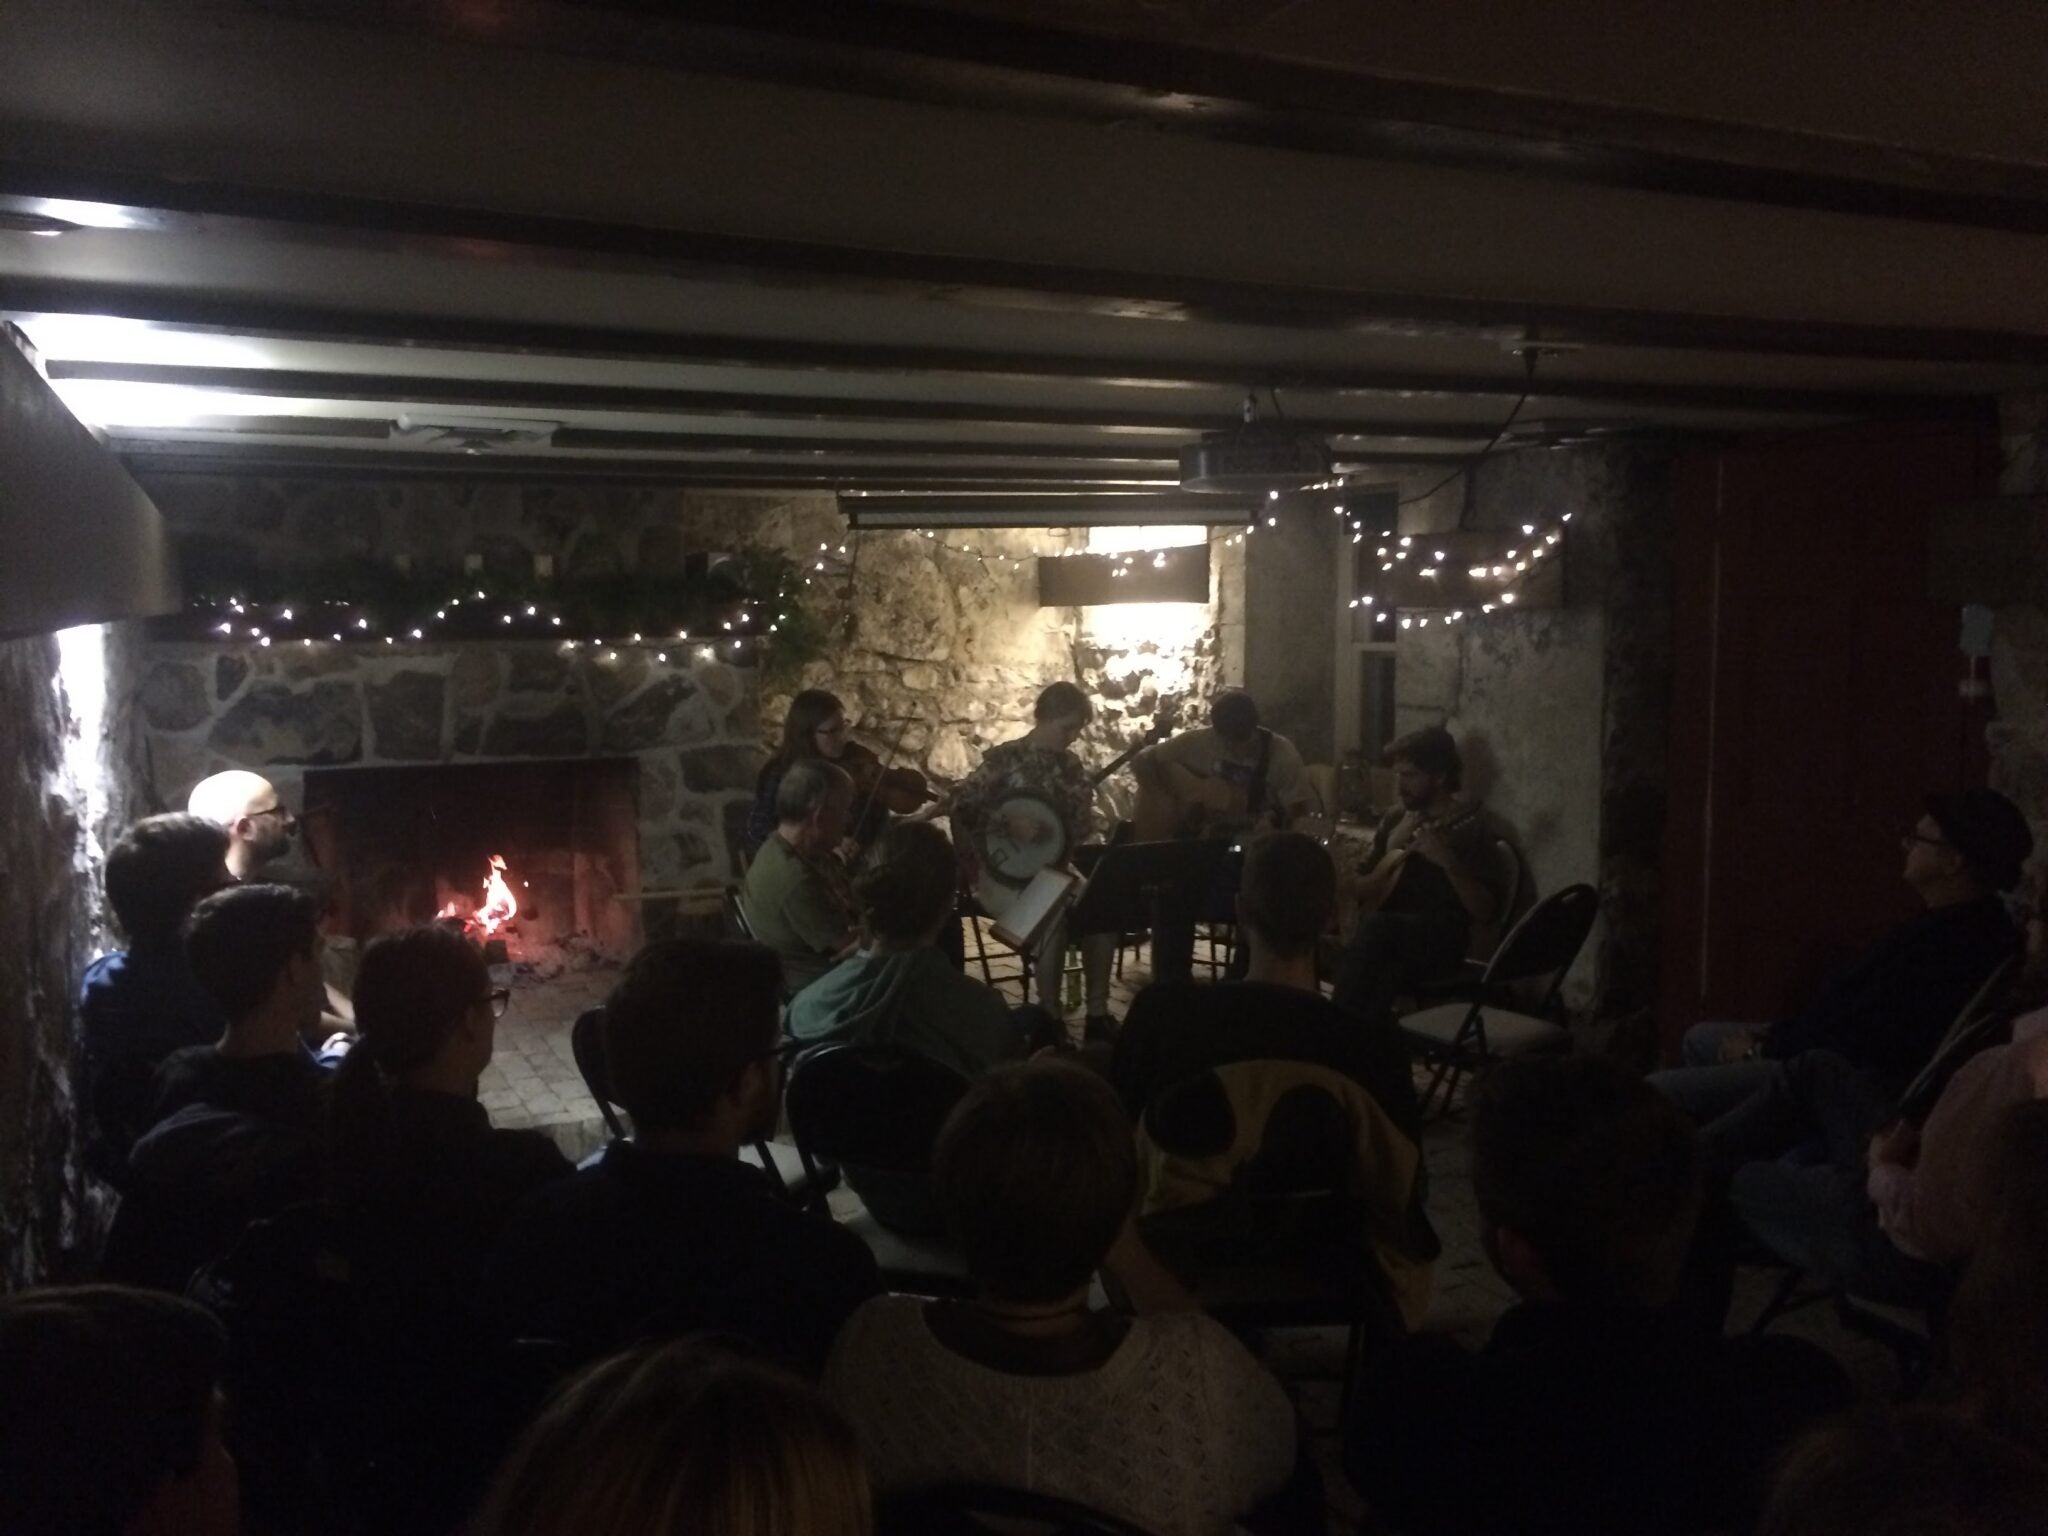 A darkly lit basement, with lights and a fire in the fireplace, a folk band plays in the corner, enjoyed by a crowd.